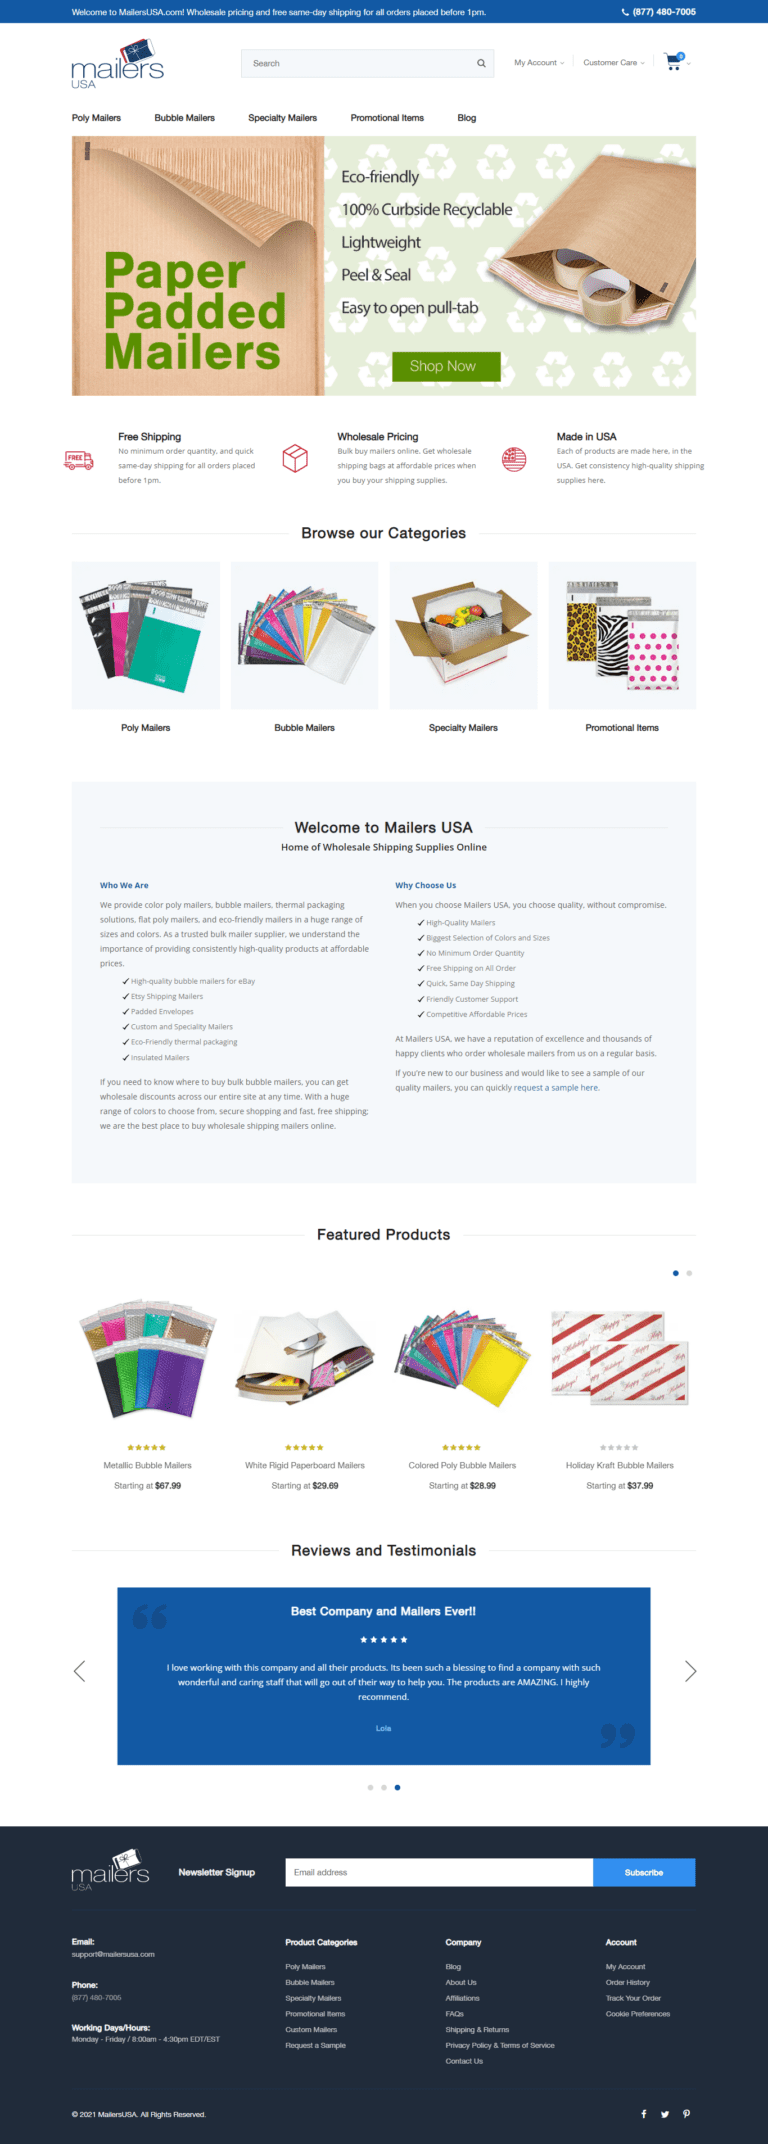 Mailersusa.com homepage with Paper padded Mailers image